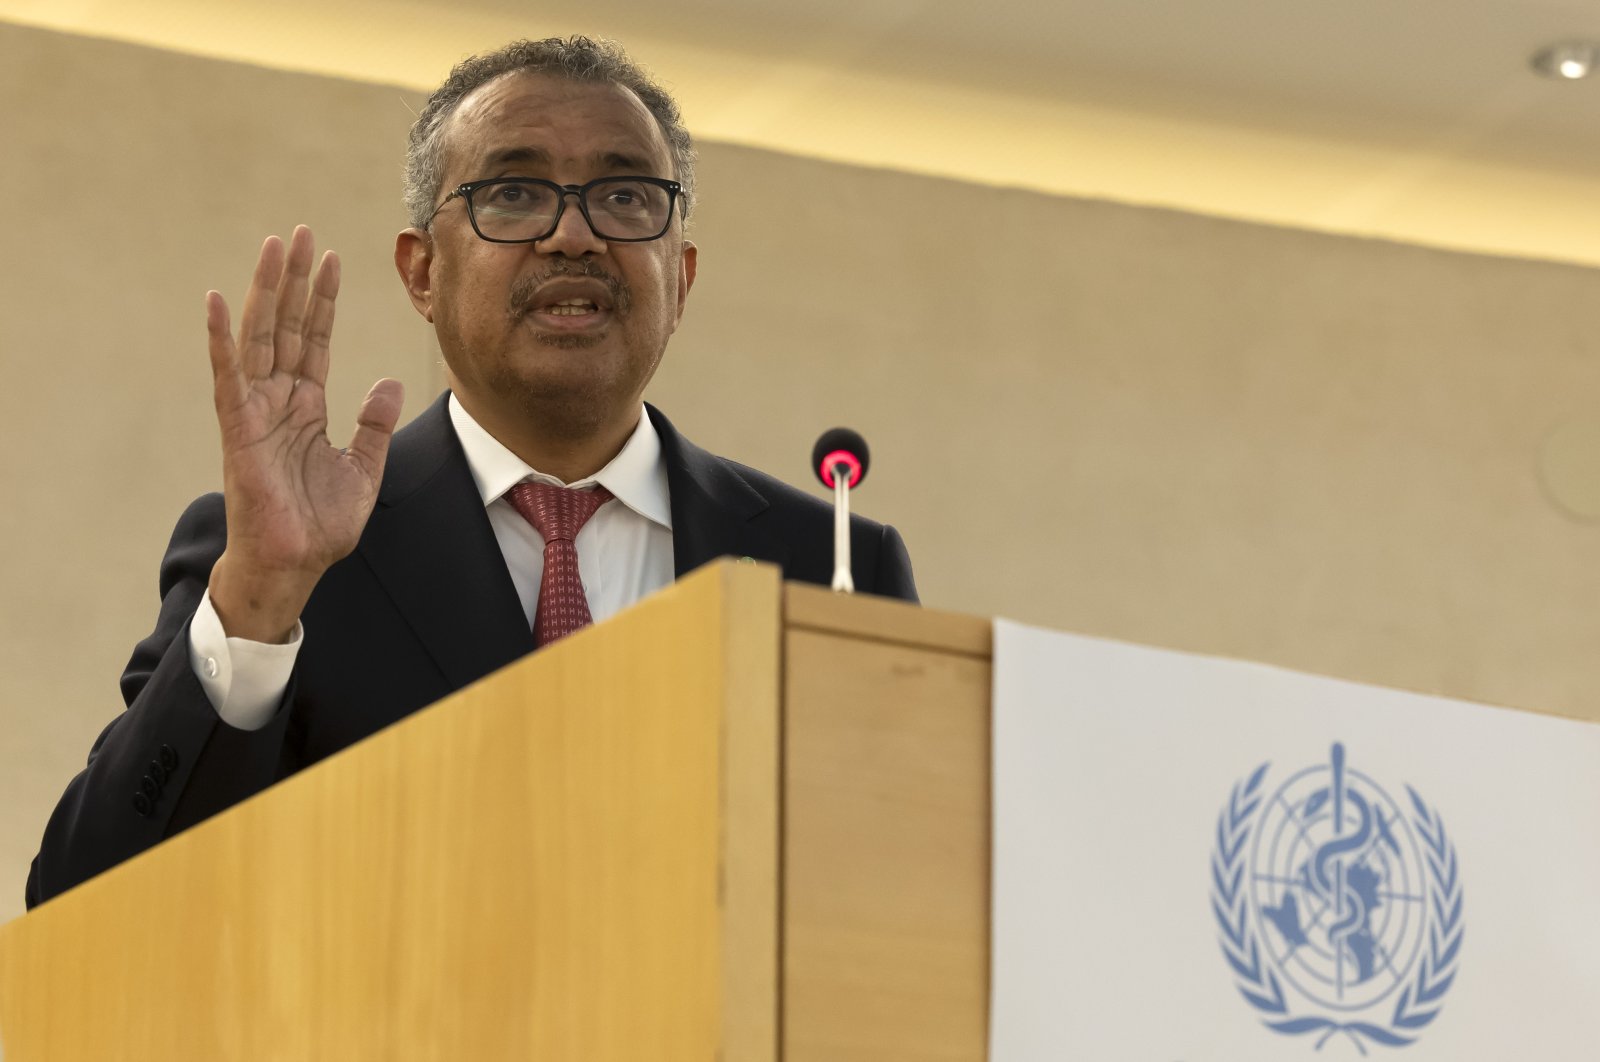 Tedros Adhanom Ghebreyesus, head of the World Health Organization (WHO) takes an oath after his reelection, during the 75th World Health Assembly at the European headquarters of the United Nations in Geneva, Switzerland, May 24, 2022. (EPA-EFE Photo)